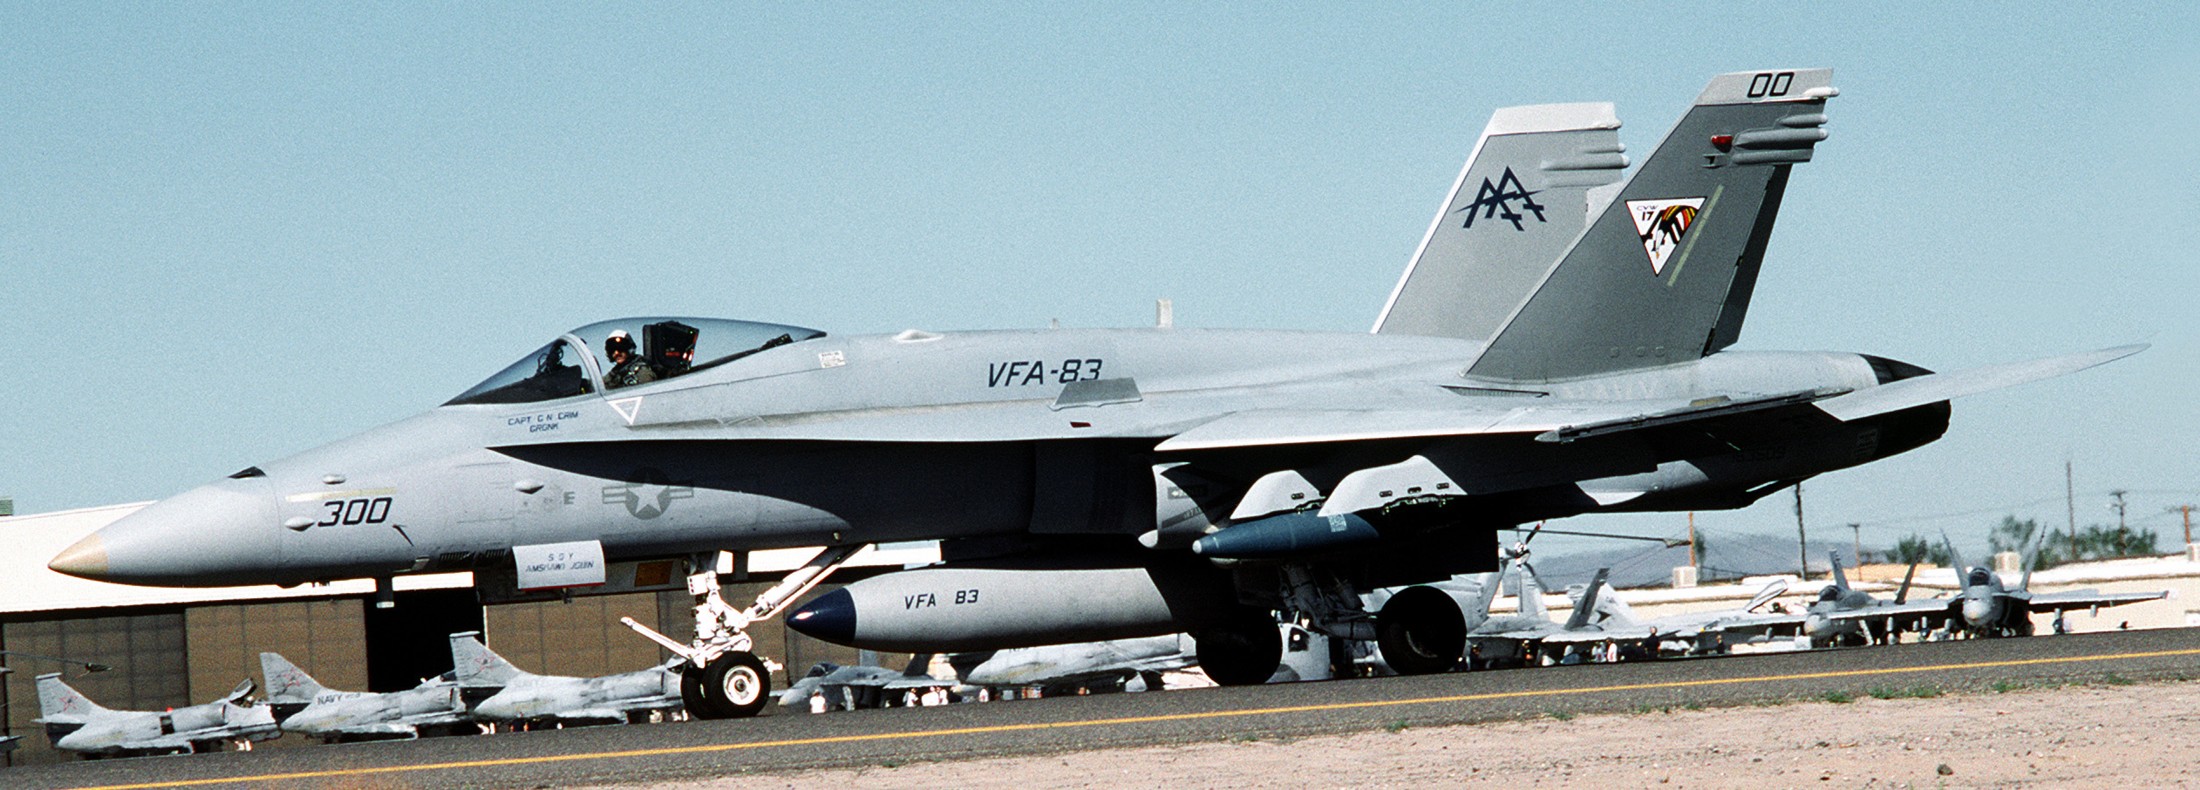 vfa-83 rampagers strike fighter squadron f/a-18c hornet cvw-17 nas fallon 148p